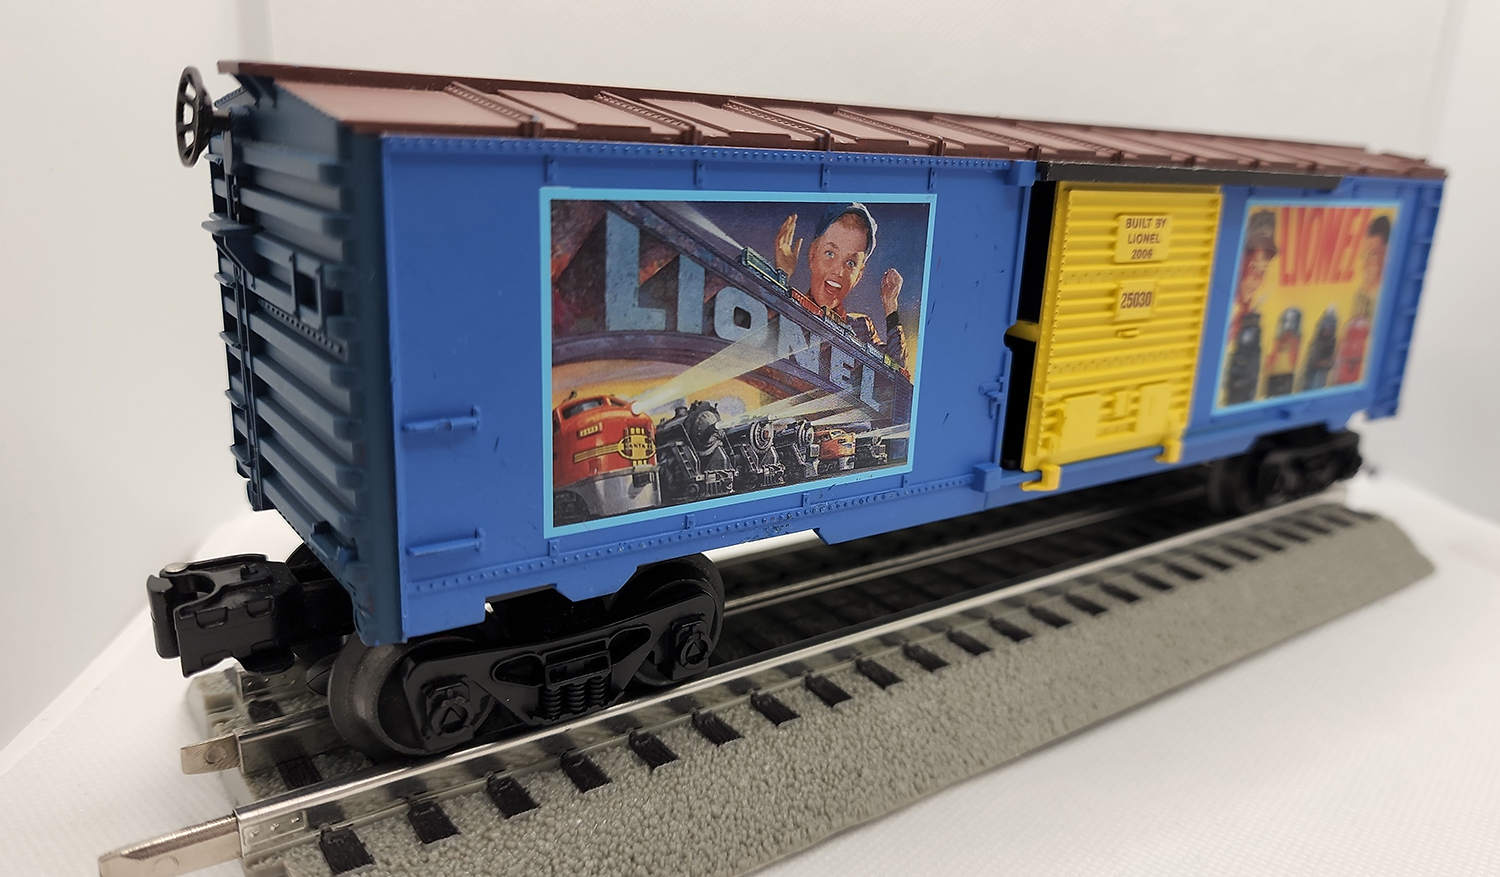 1st view of the Lionel 2006 Billboard Car #25030 in my O-scale Collection